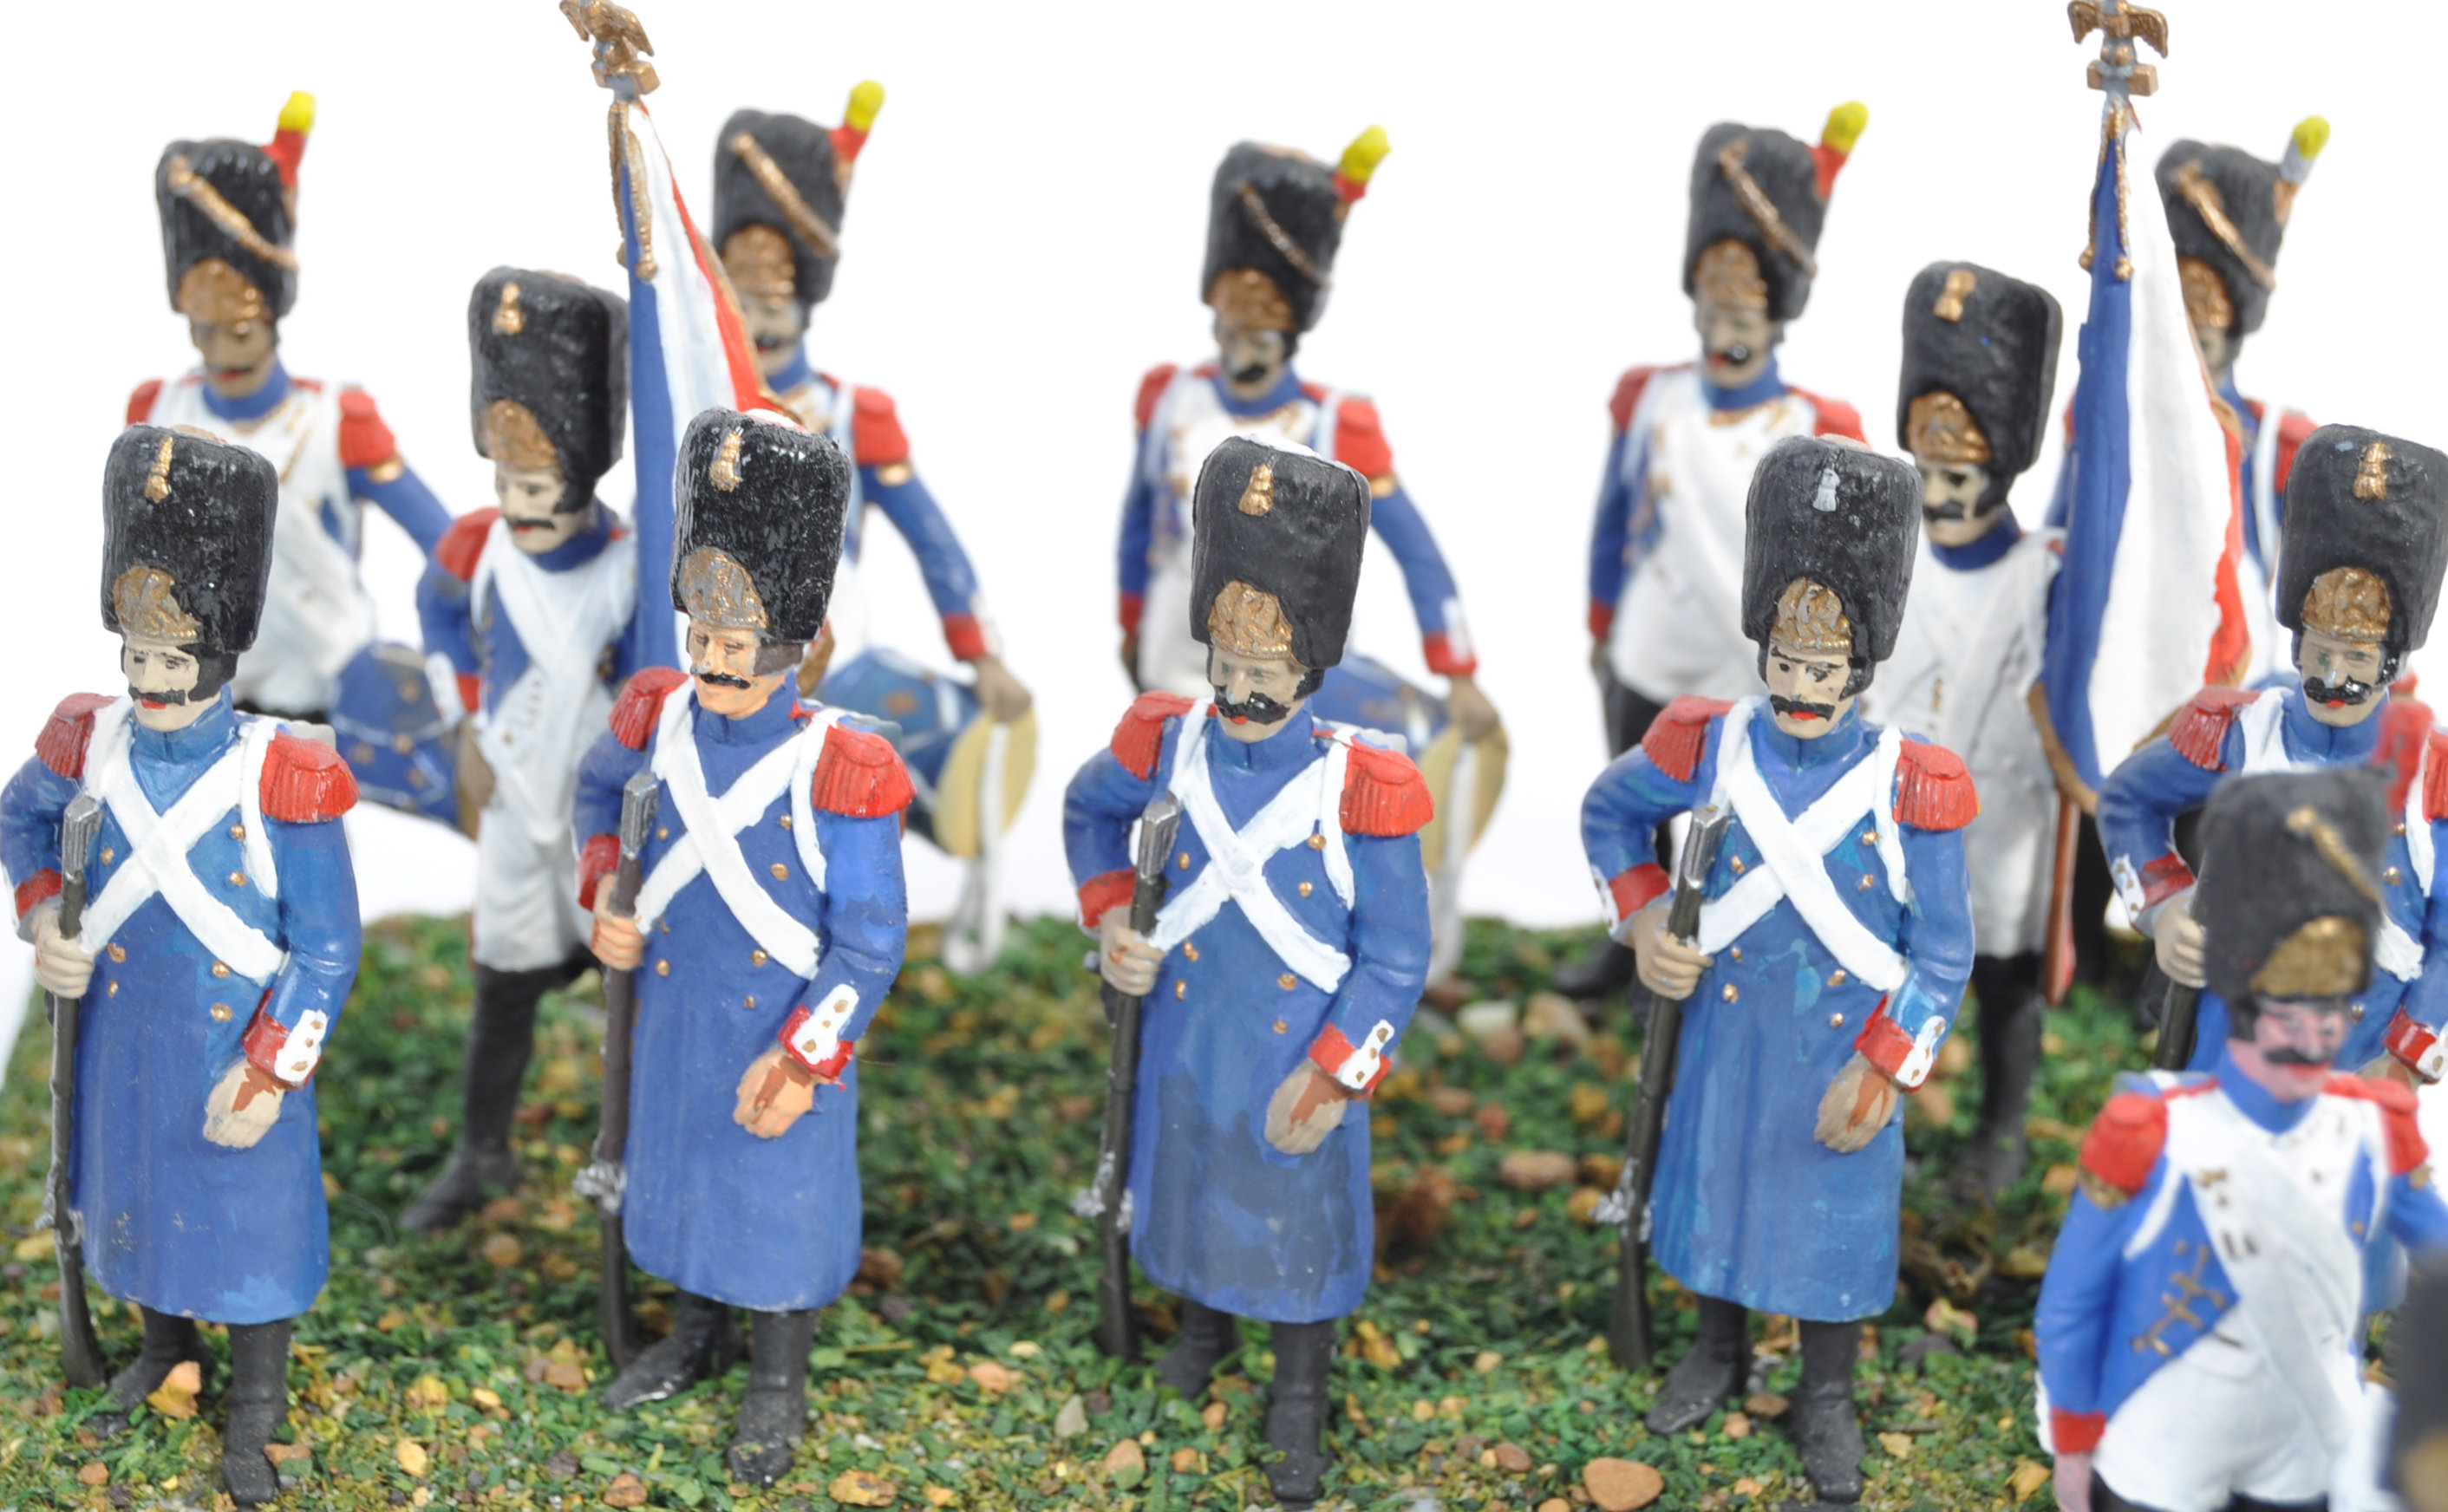 COLLECTION OF 1/32 SCALE PLASTIC NAPOLEONIC FIGURES - Image 6 of 7